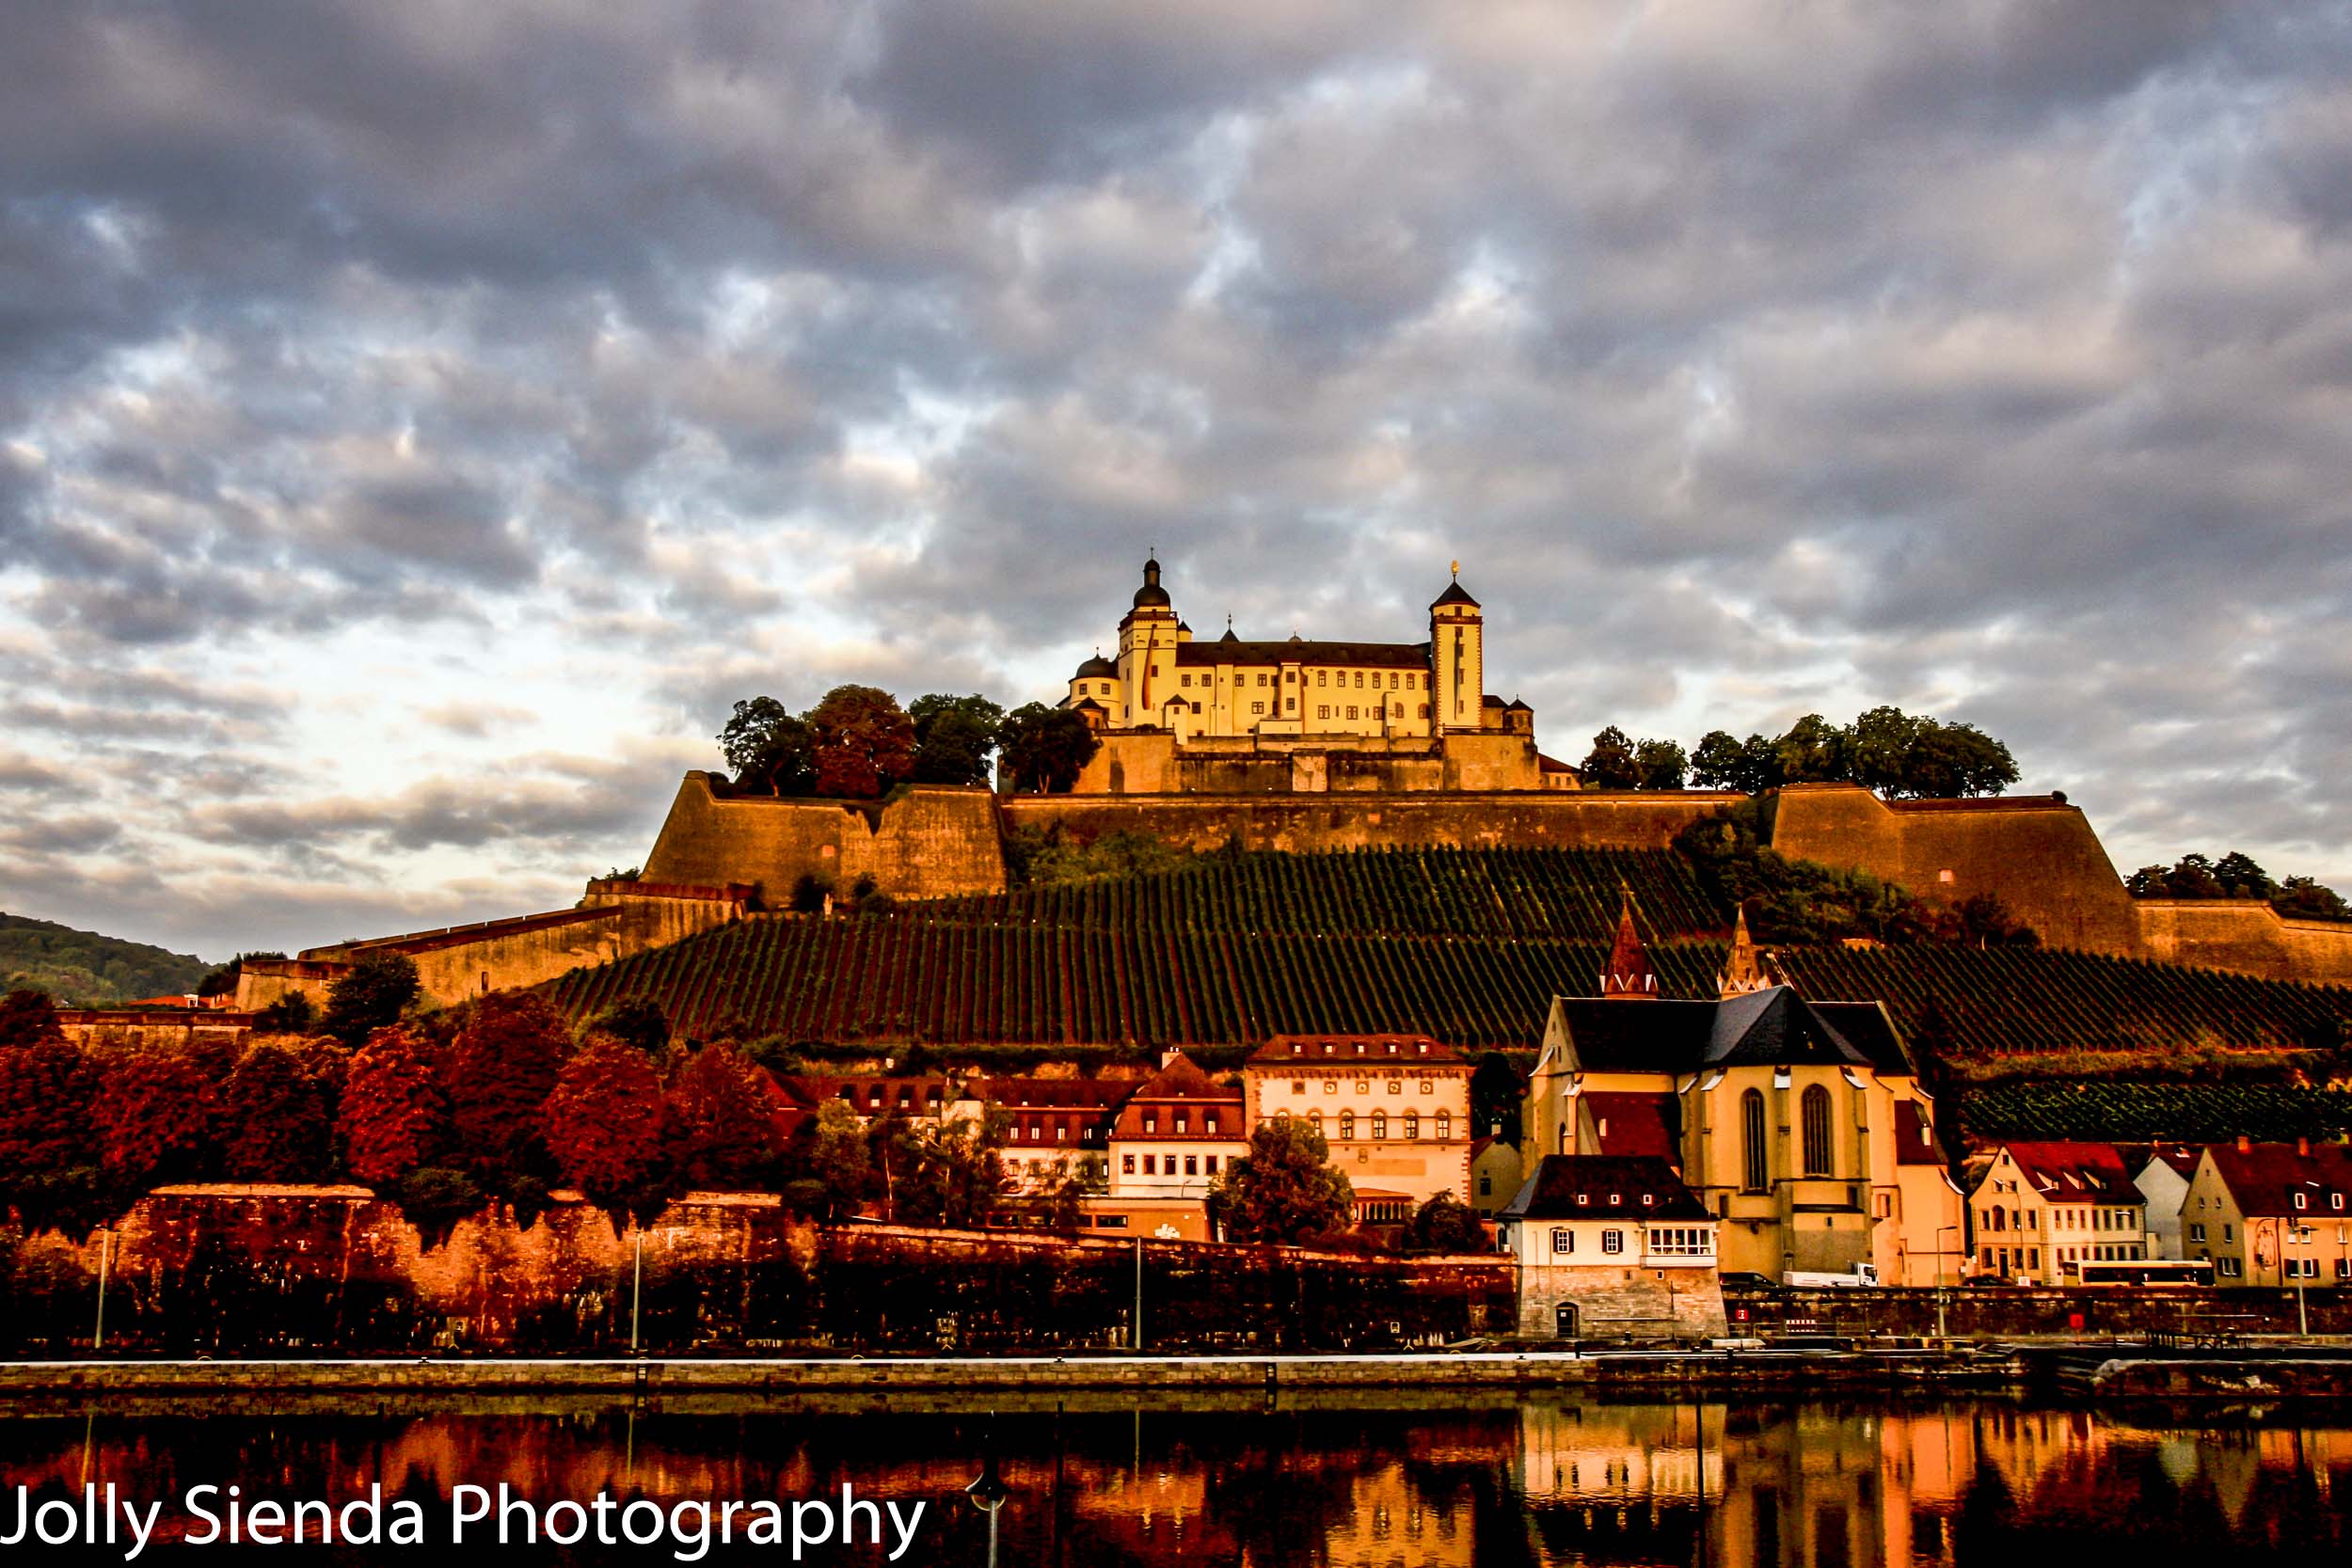 Fortress Marienburg basks in the sunset of Autumn colors with ne